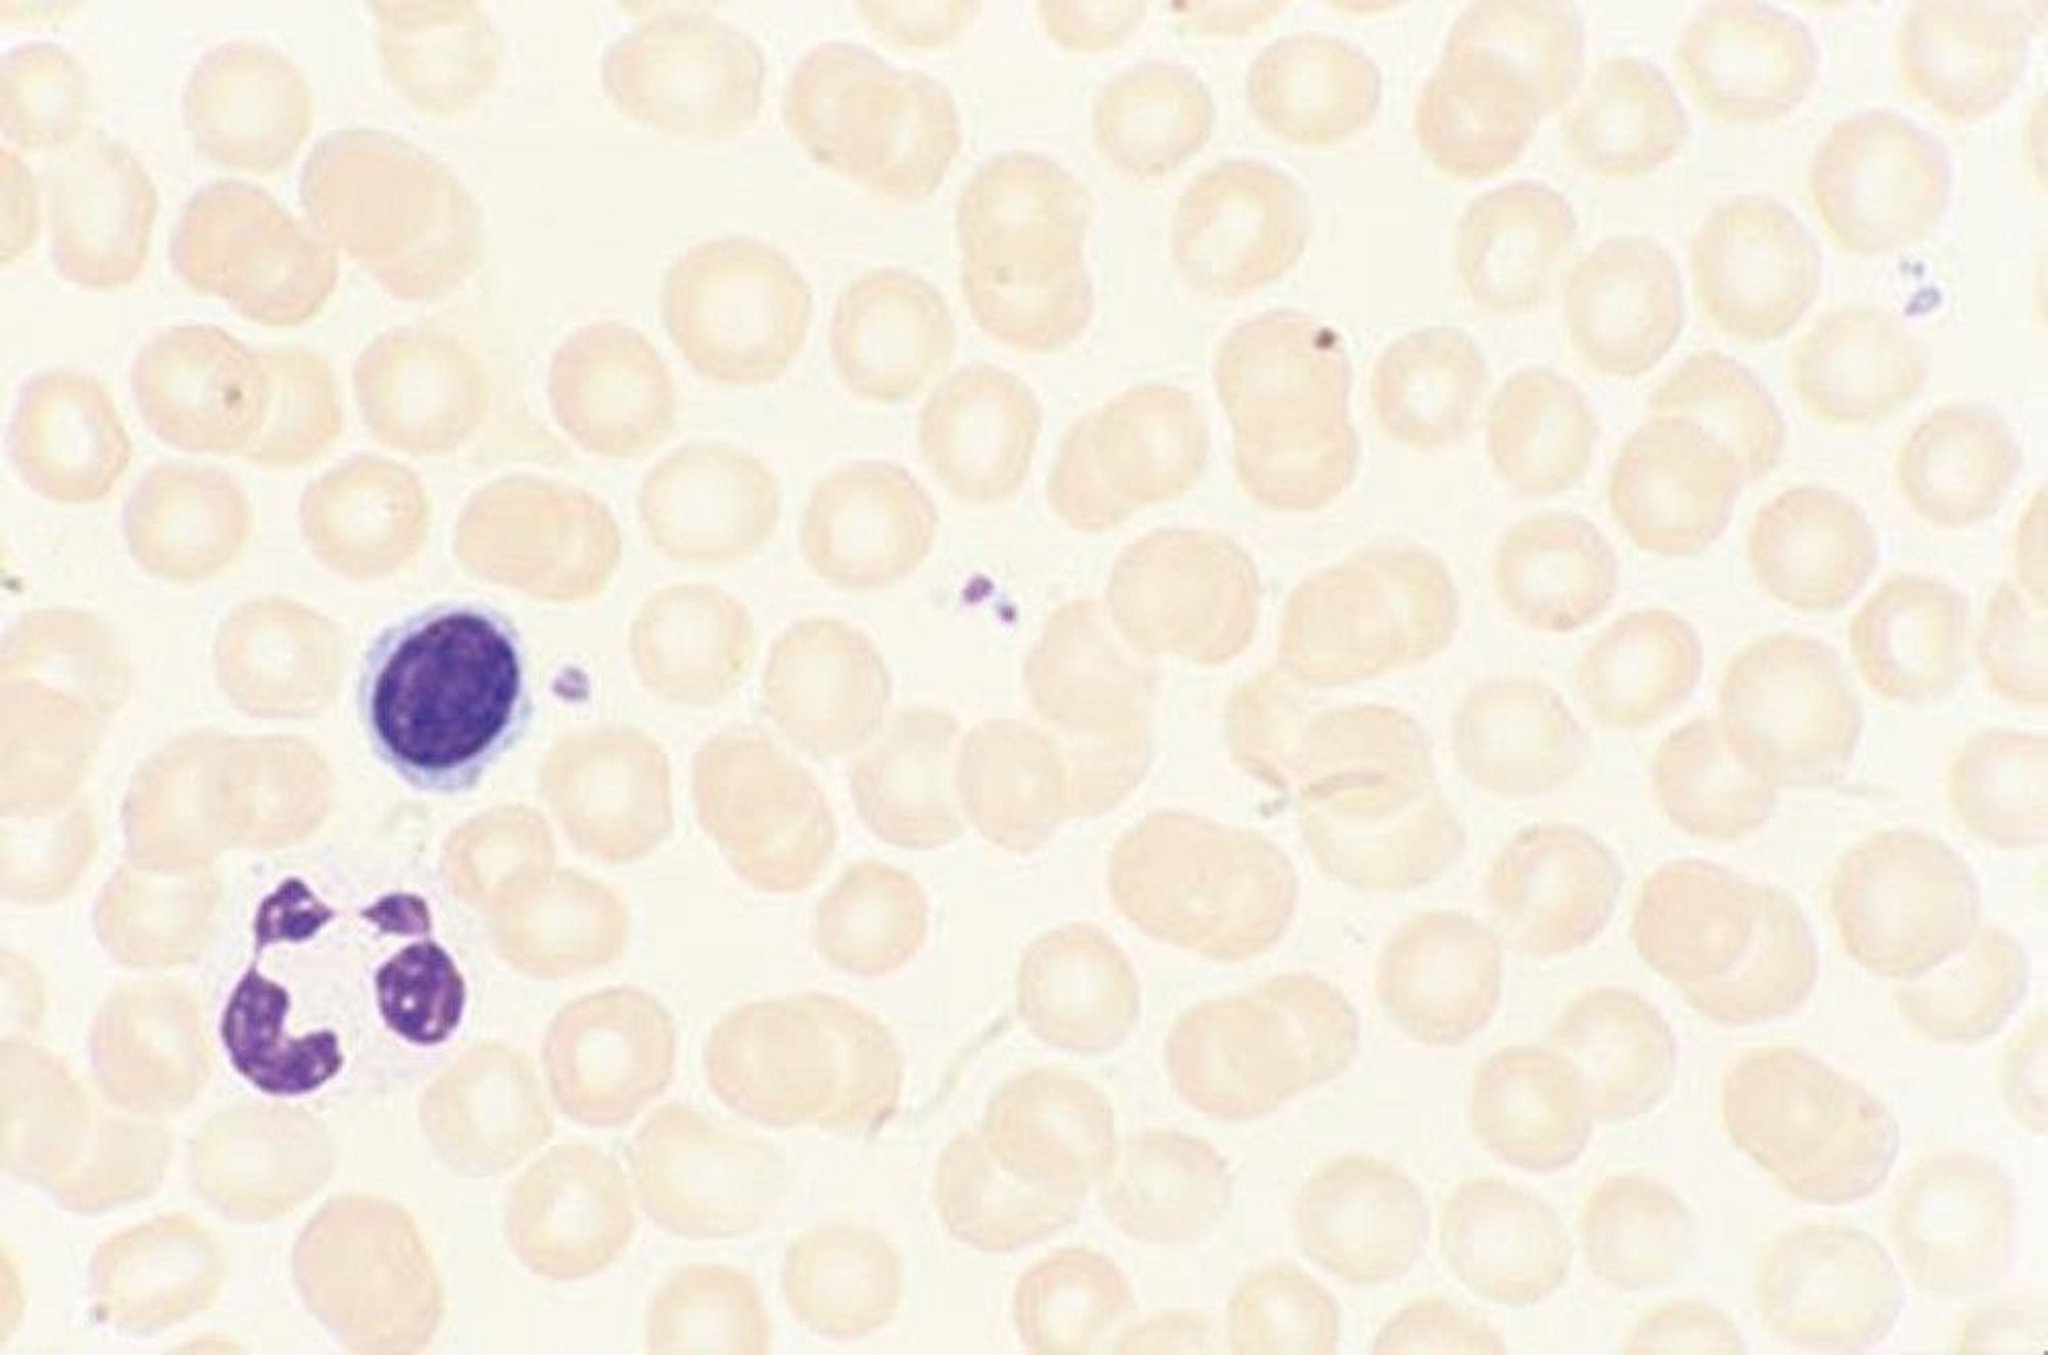 Peripheral Blood Smear, Normal